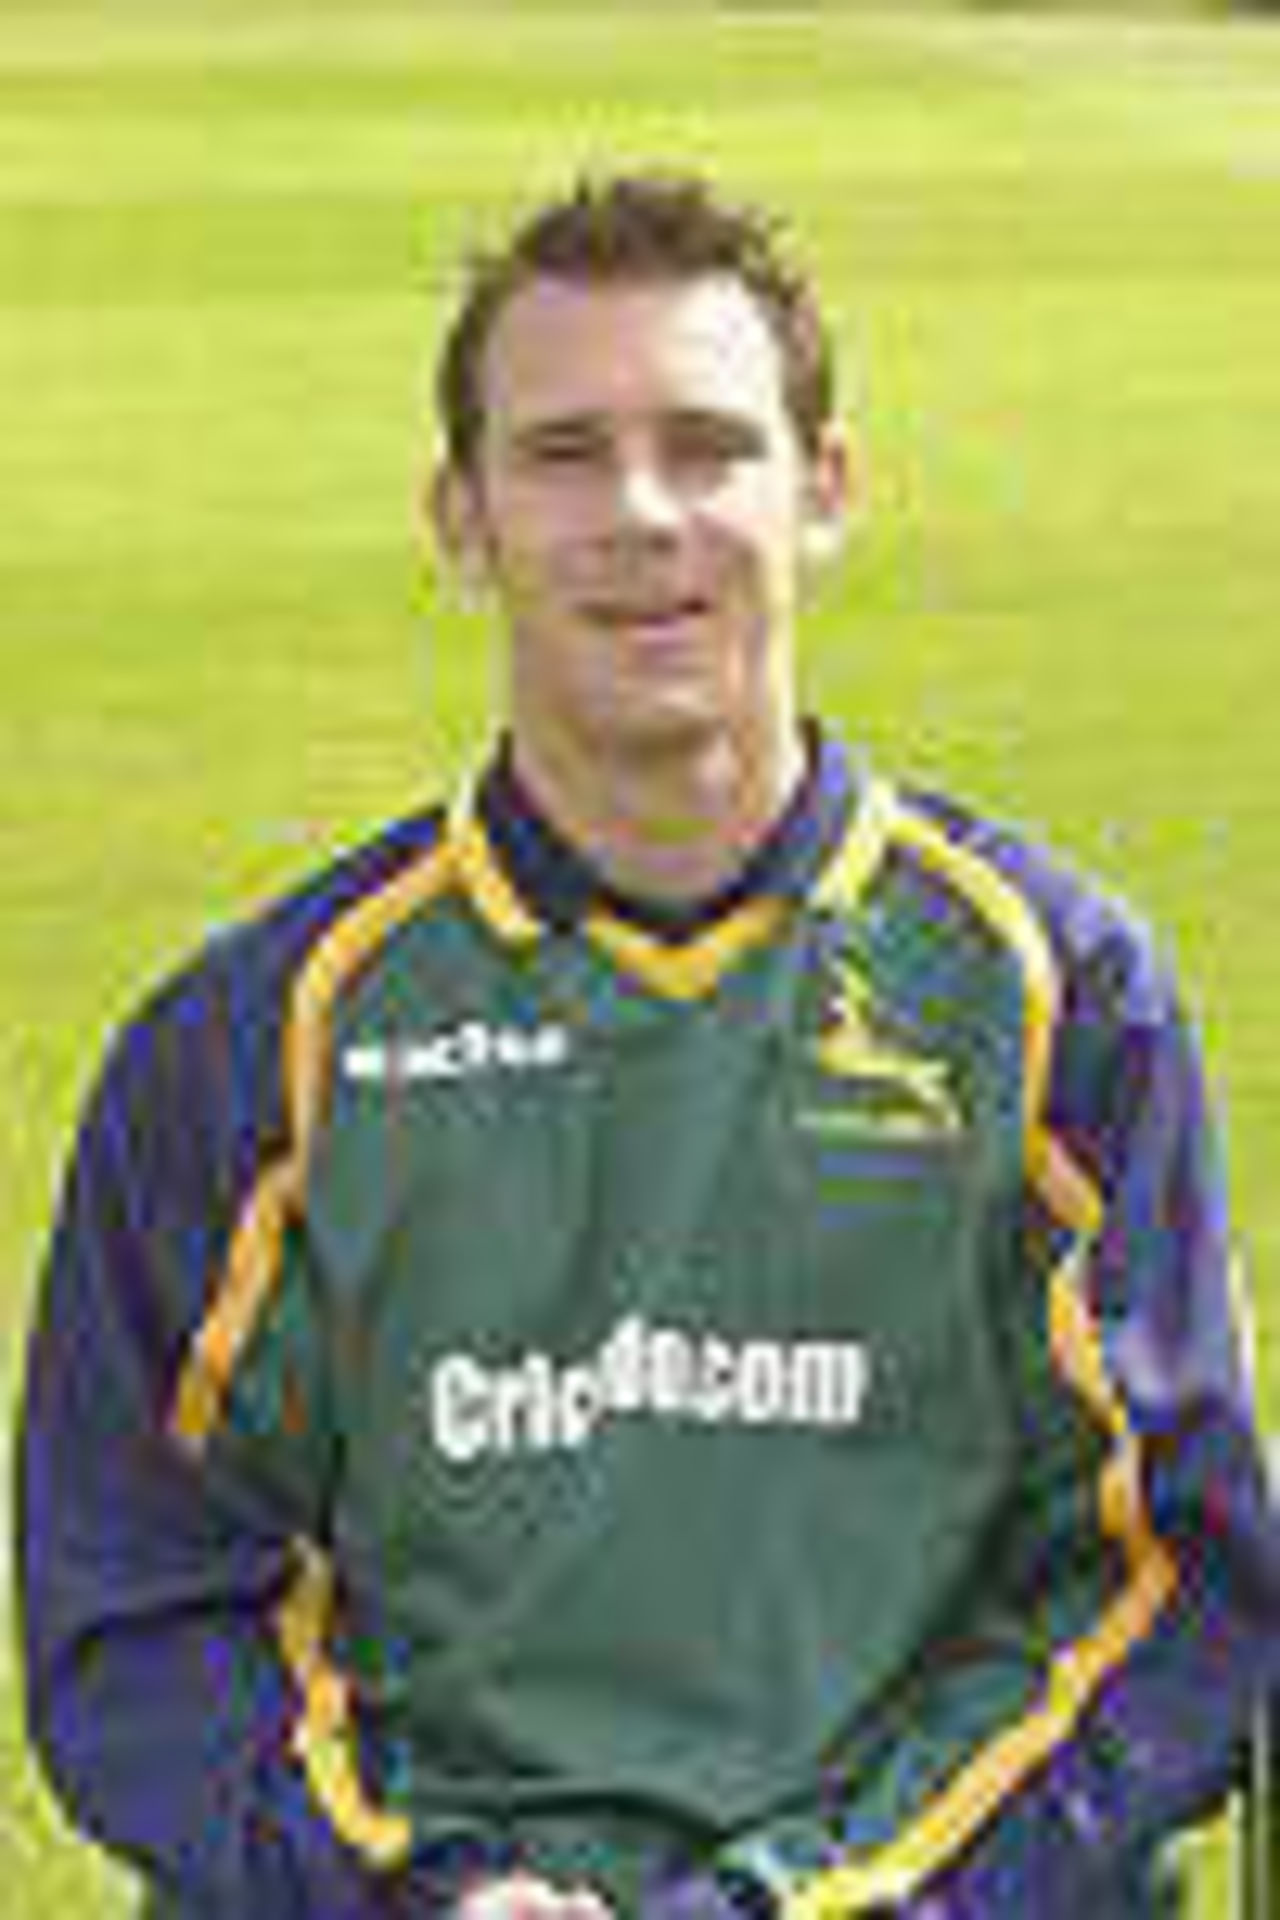 Taken at the 2002 Nottinghamshire photocall